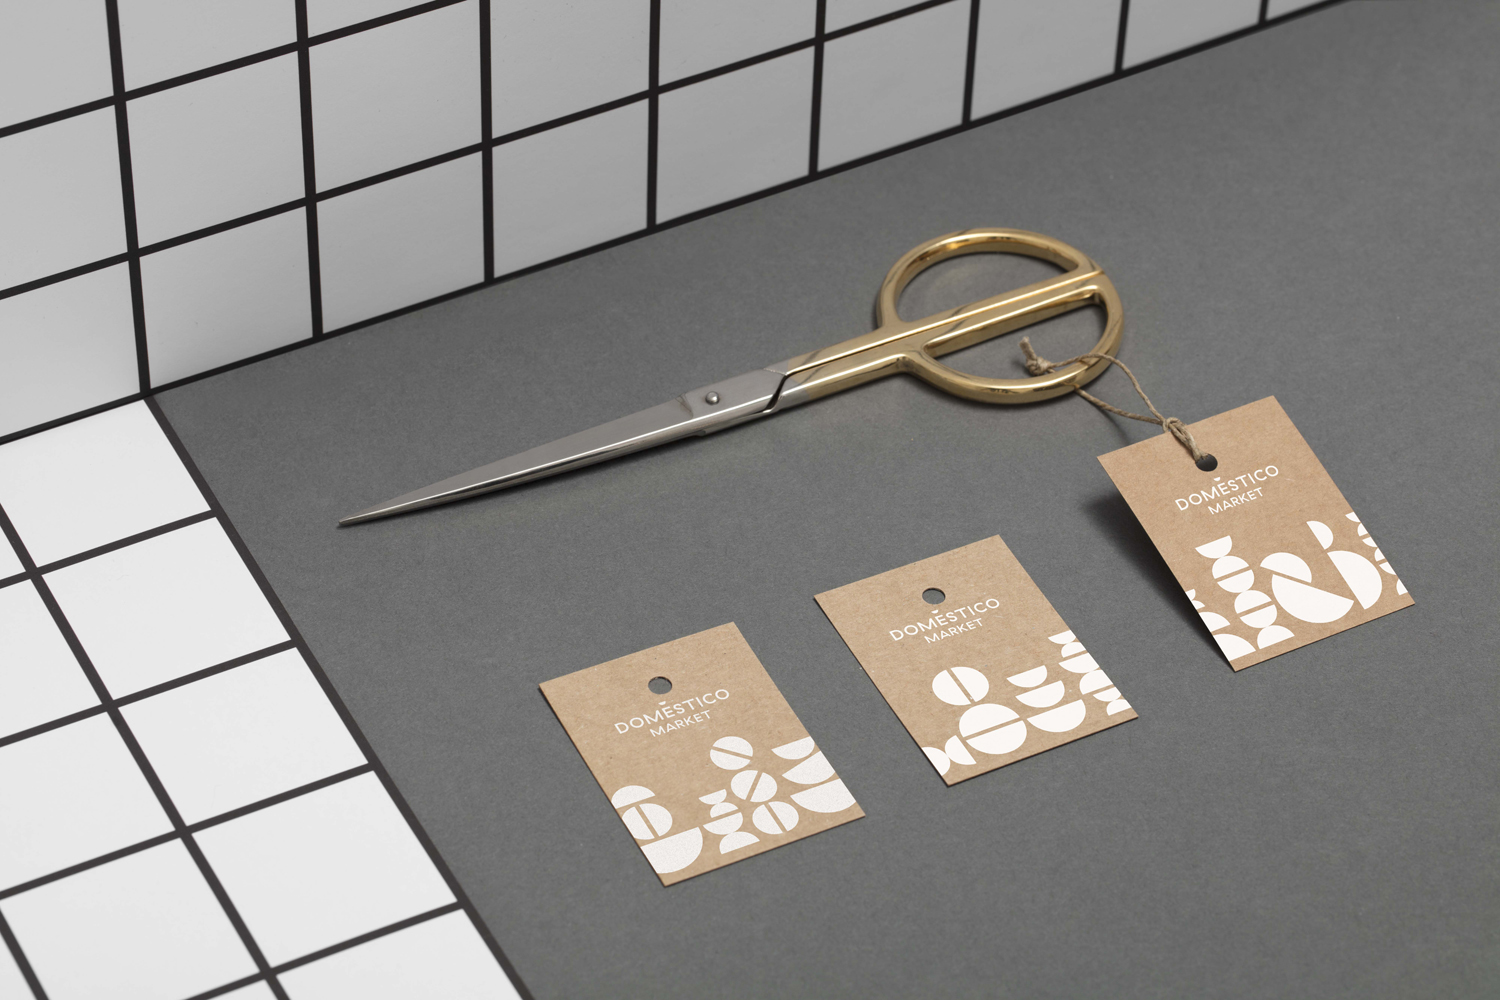 Graphic identity and tags designed by Mucho for Spanish furniture retailer DomésticoShop's concept store DomésticoMarket